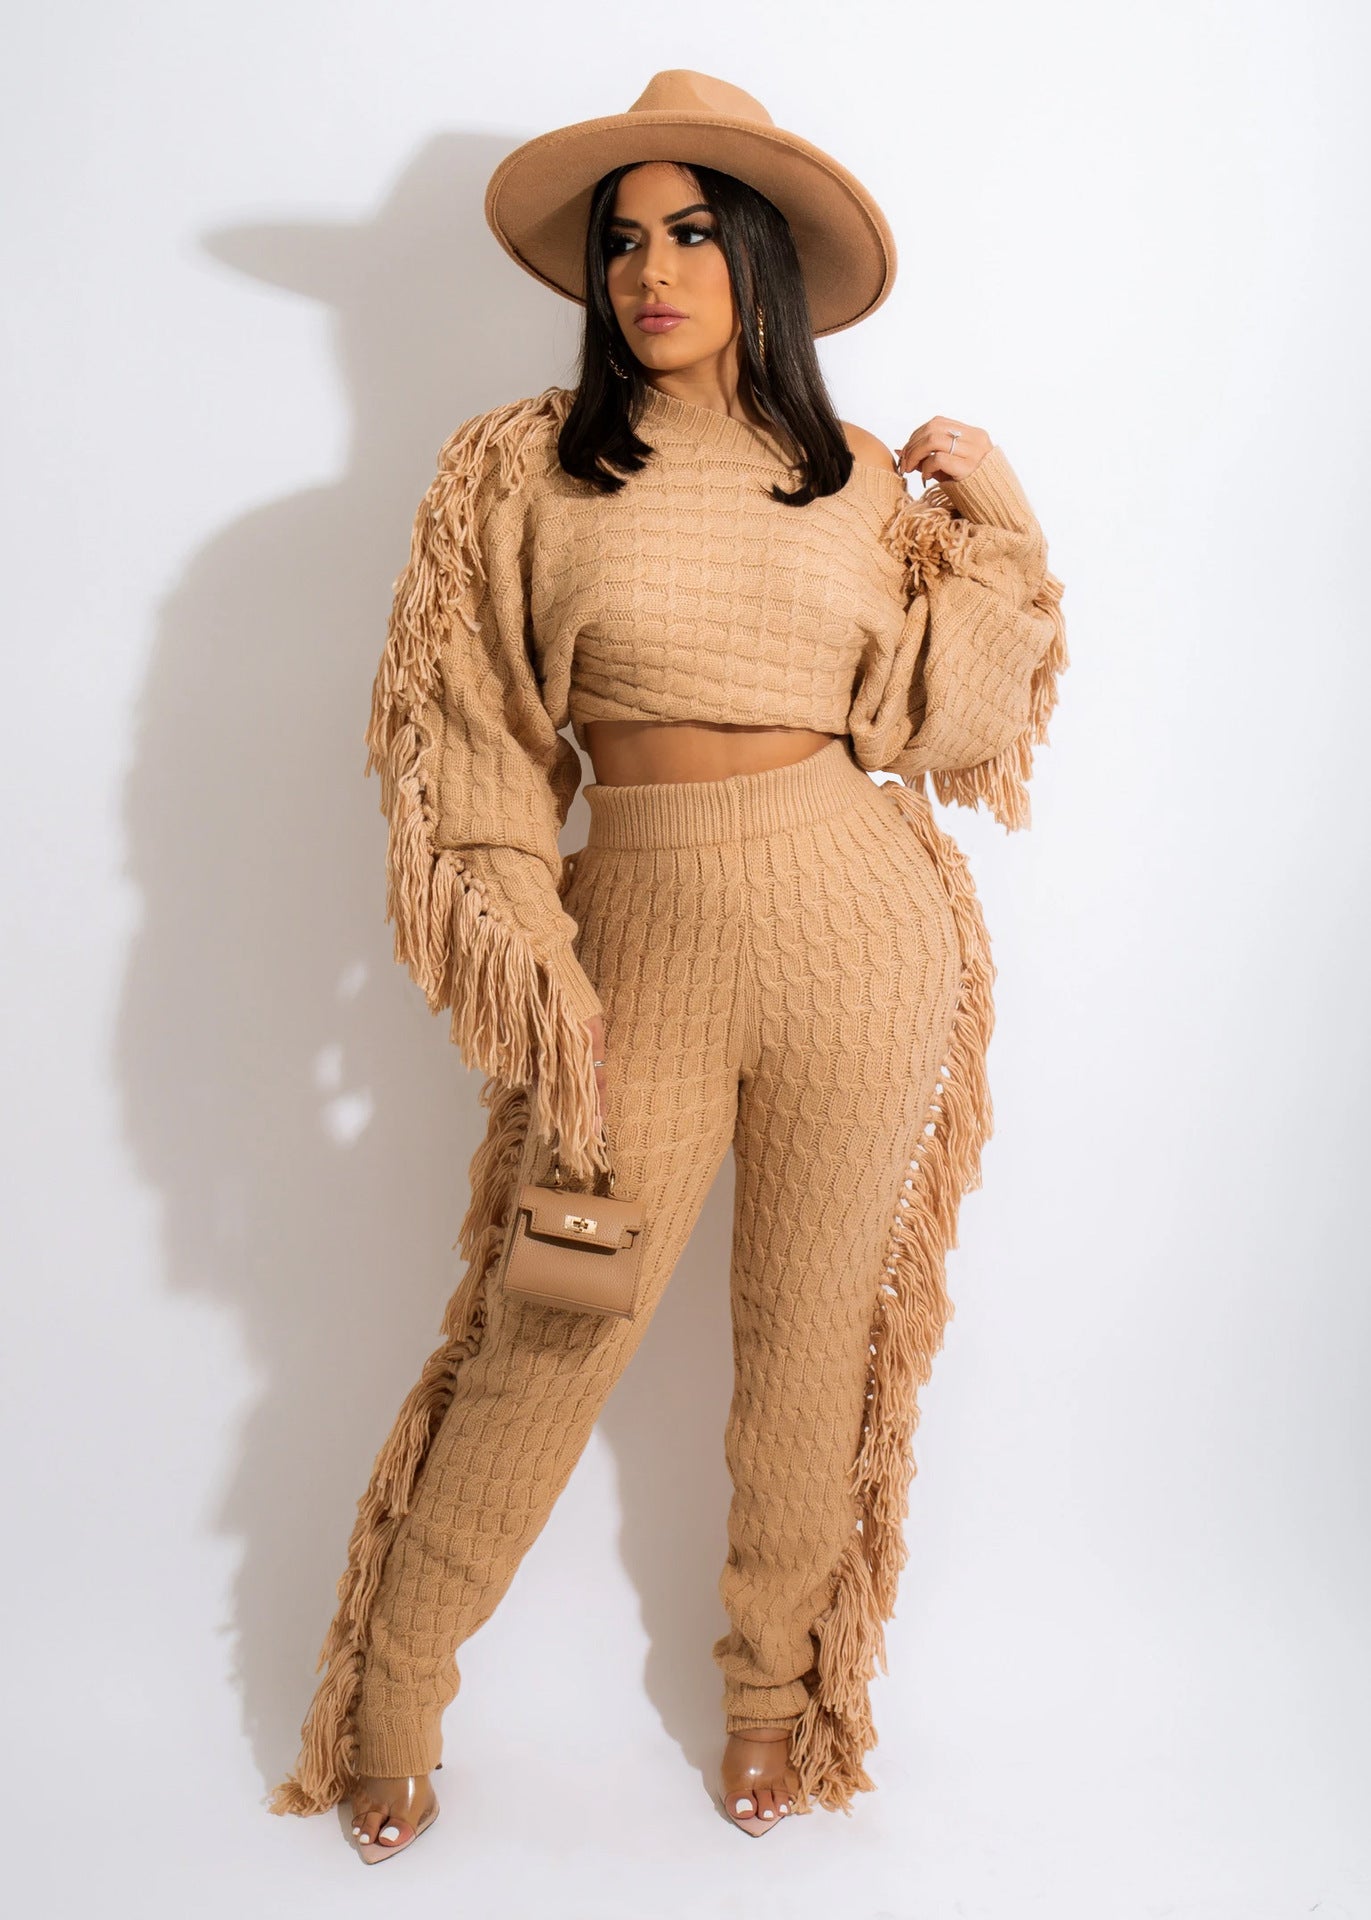 Tassel Sweater Two Piece Set - B.A.G.S (Black Apparel and Goods Store) 